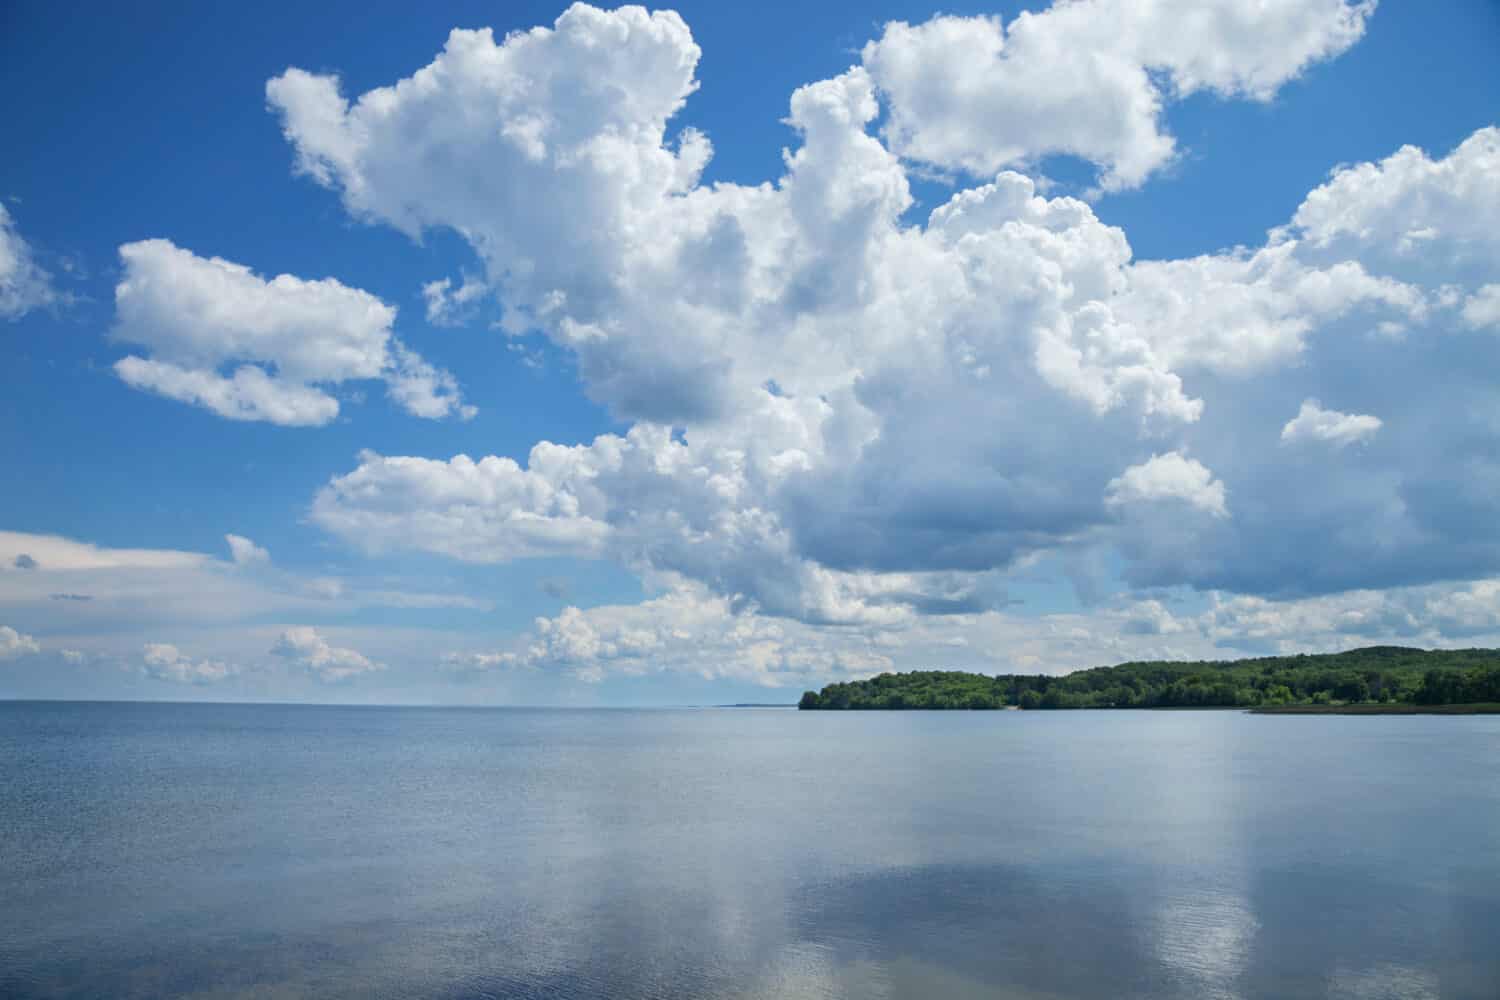 Mille Lacs Lake southwest side below dramatic clouds in north central Minnesota on a sunny summer afternoon